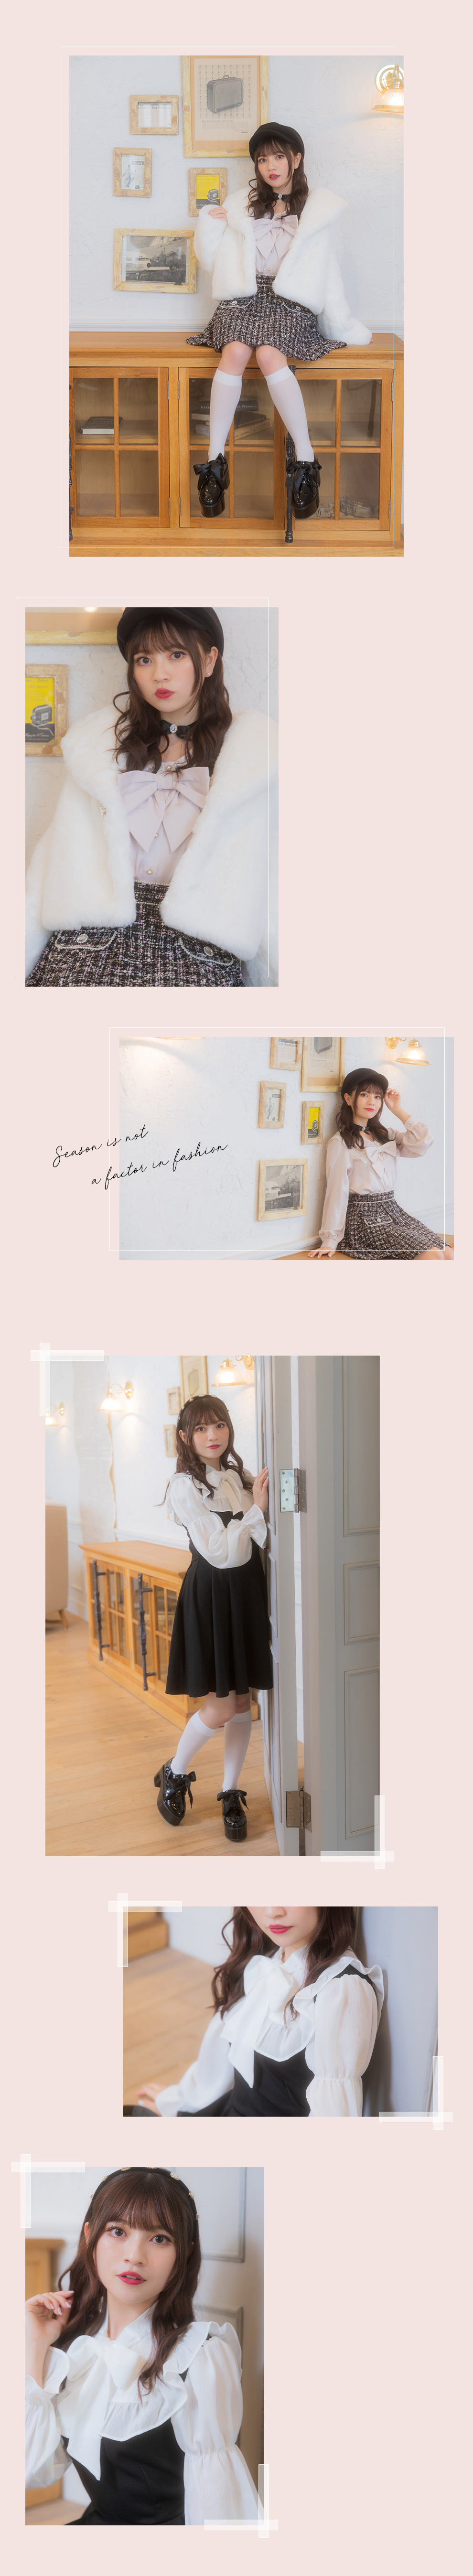 2021 Girly Winter Collection Vol.1